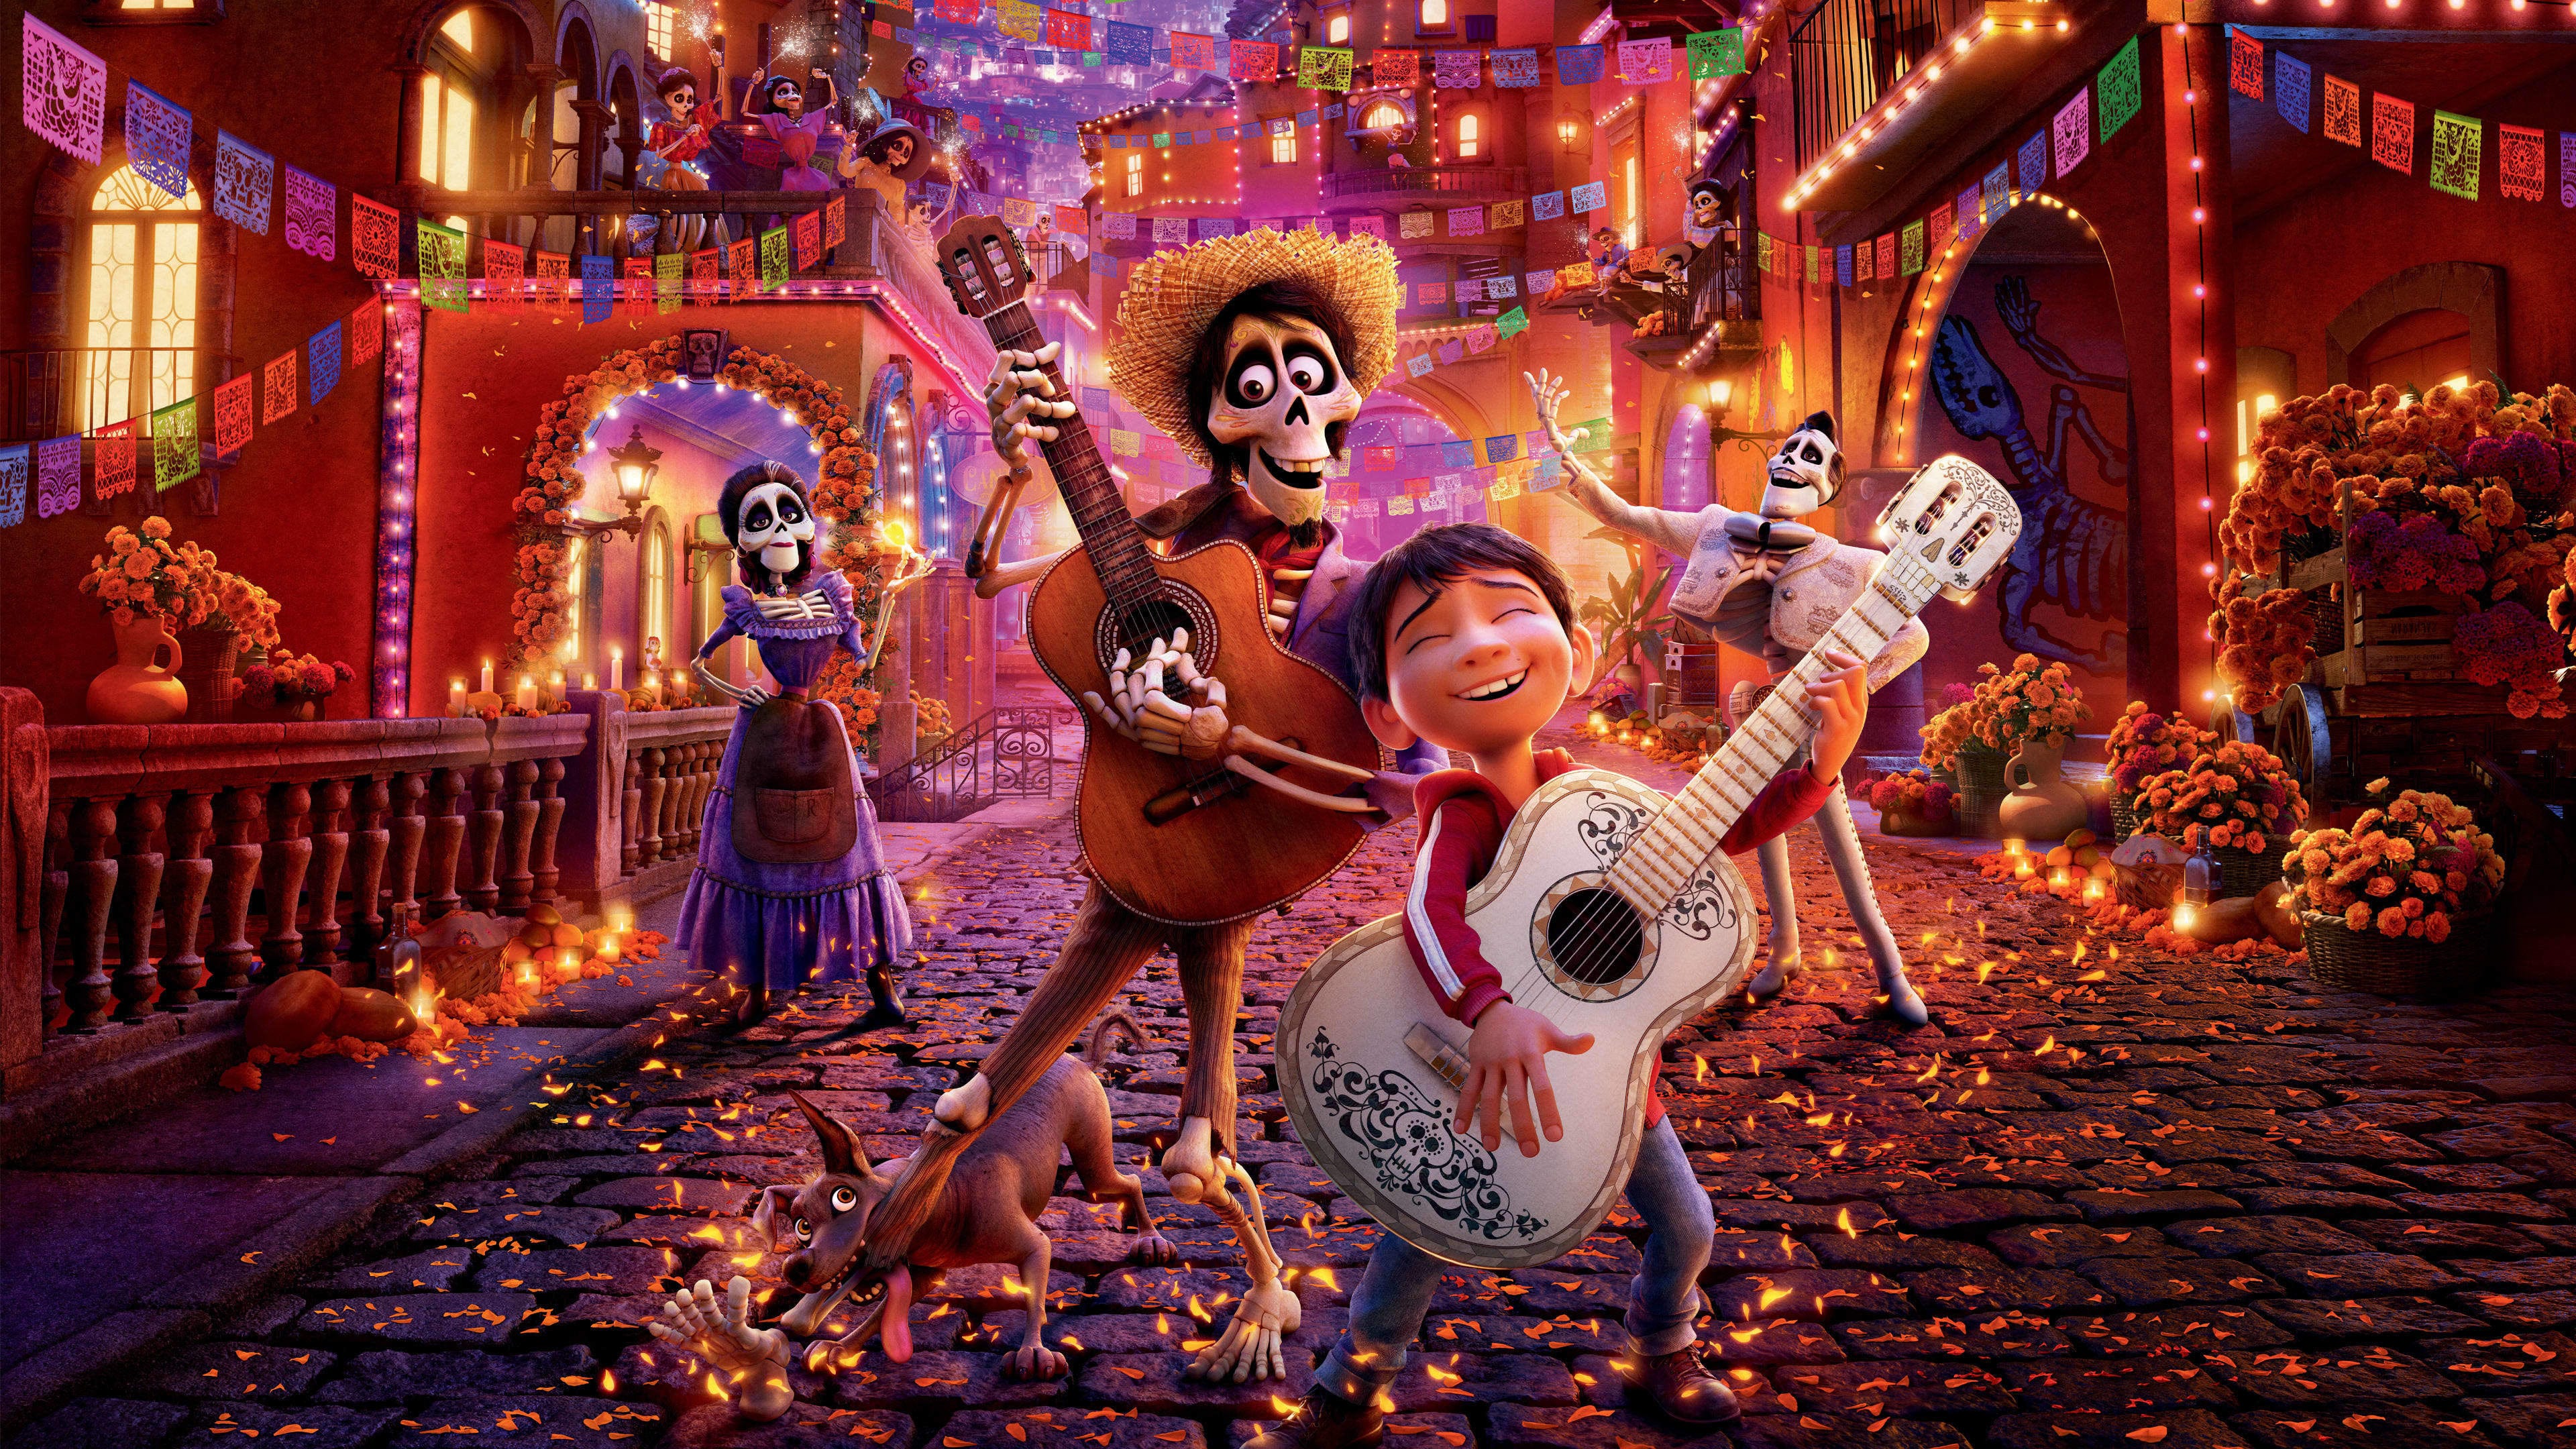 Coco Trailer Introduces Miguel's Family from the Land of the Dead